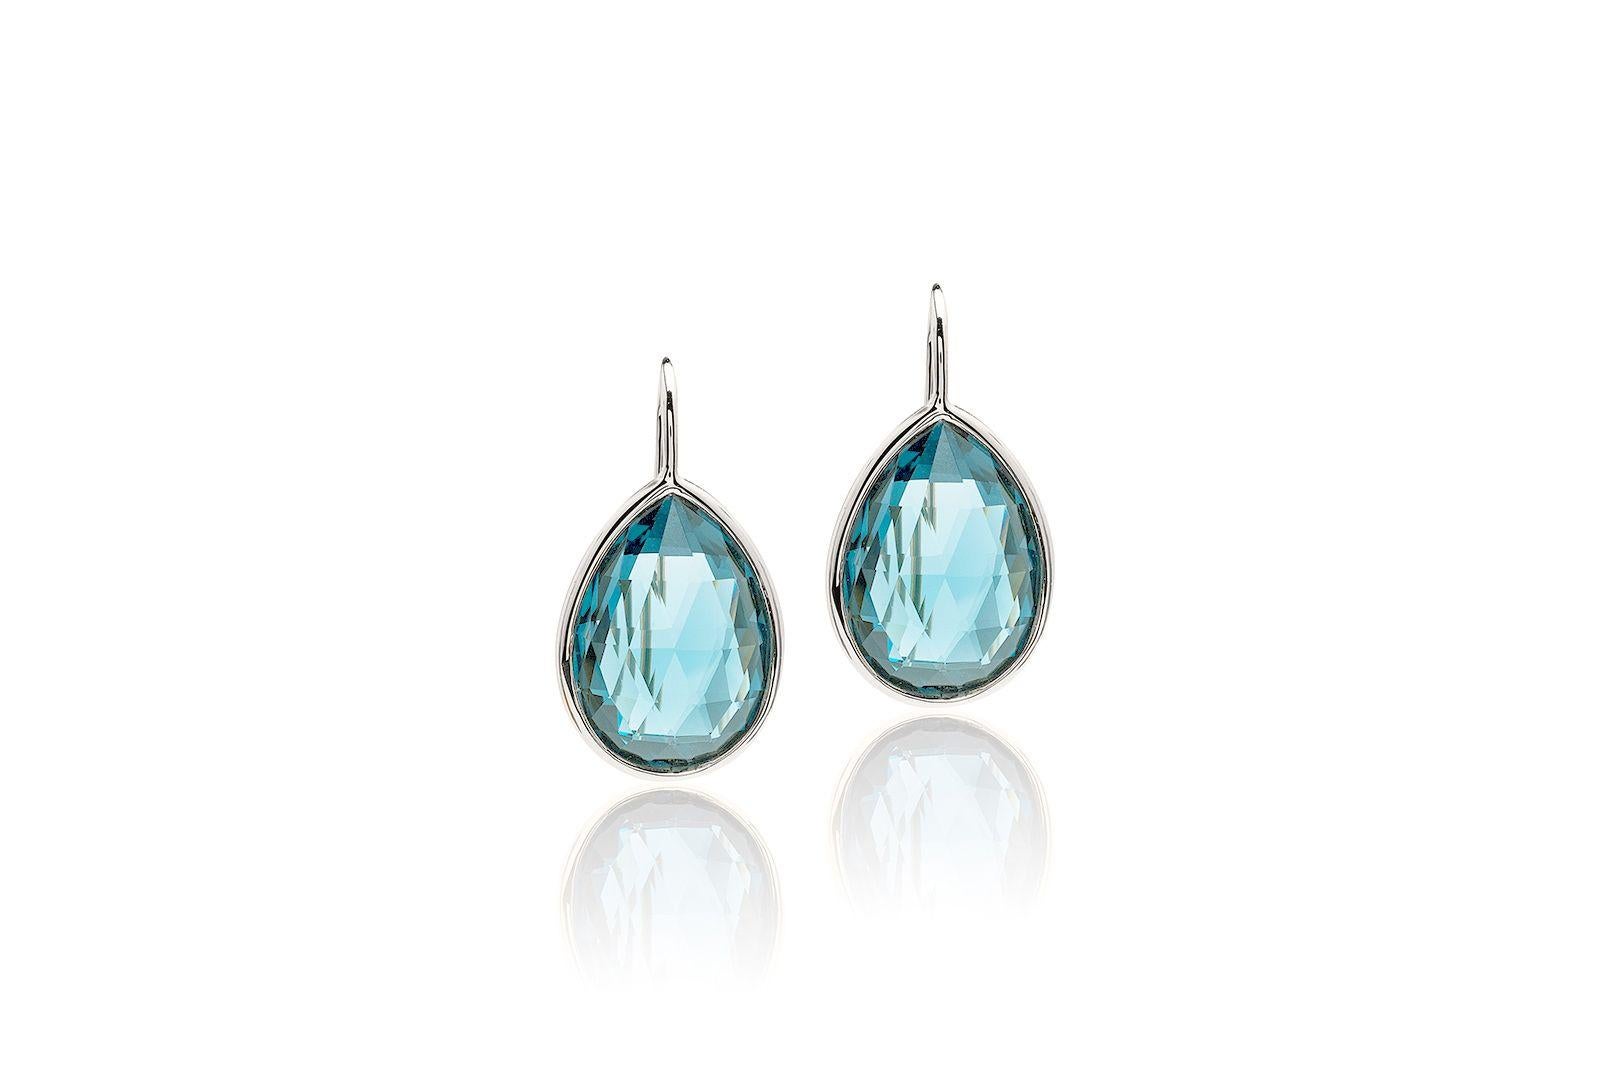 Blue Topaz Pear Shape Briolette Earrings on Wire in 18K White Gold, from 'Gossip' Collection

Stone Size: 10 x 14 mm 

Gemstone Approx Wt: Blue Topaz - 14.40 Carats 